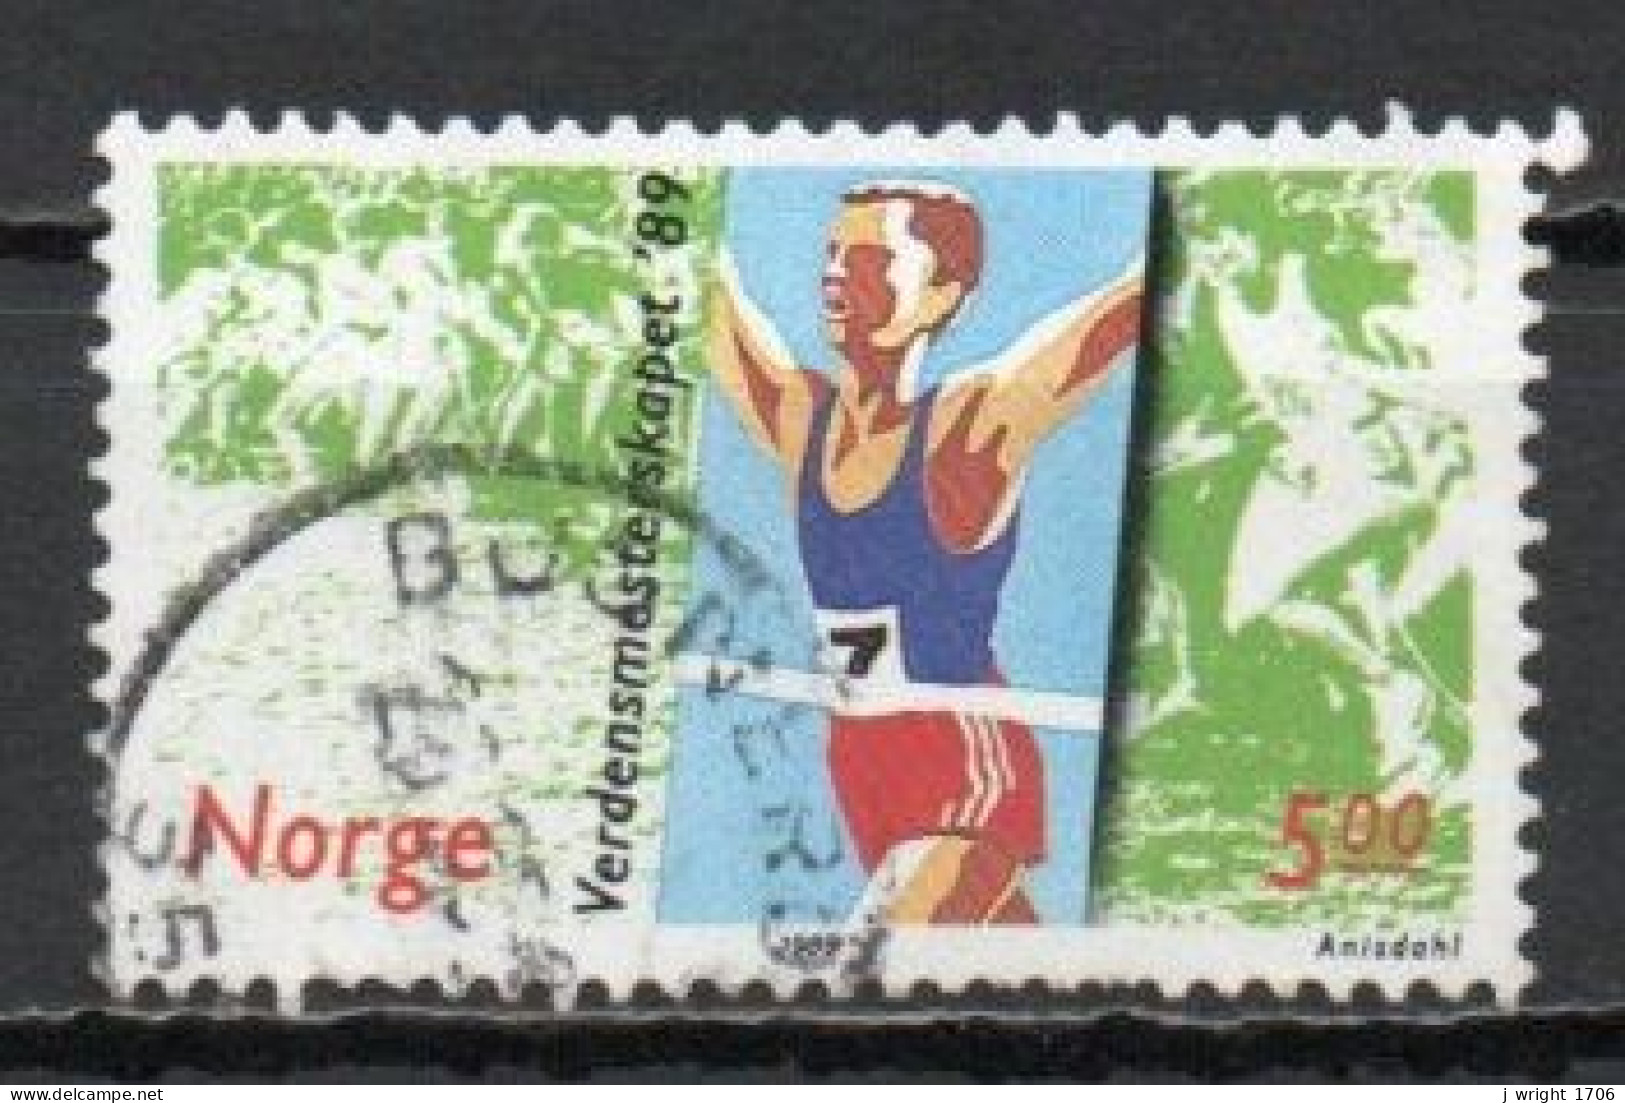 Norway, 1989, World Cross Country Championships, 5kr, USED - Usados